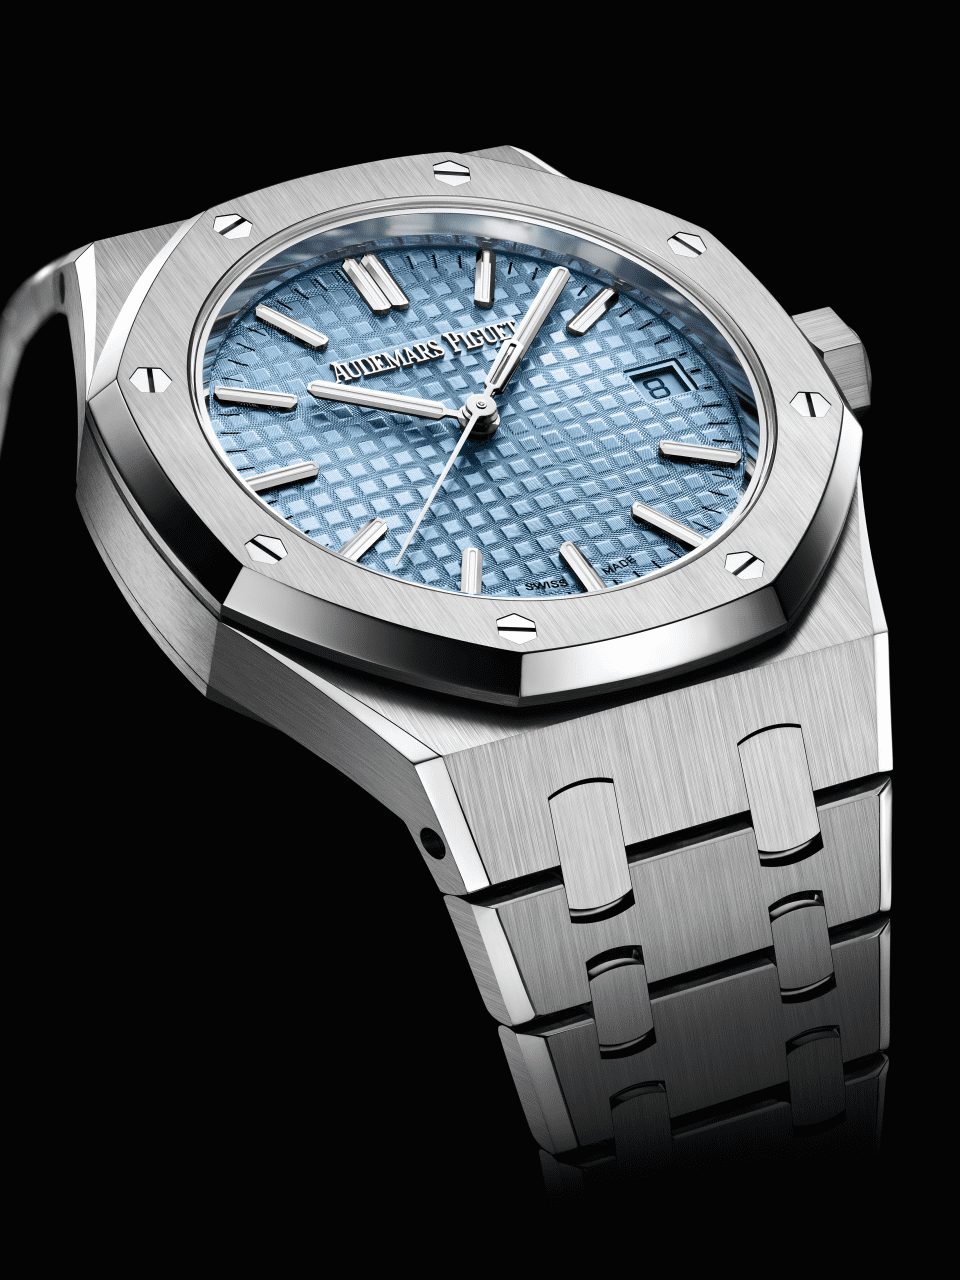 The fight against crime: Audemars Piguet offers new guarantee for stolen watches